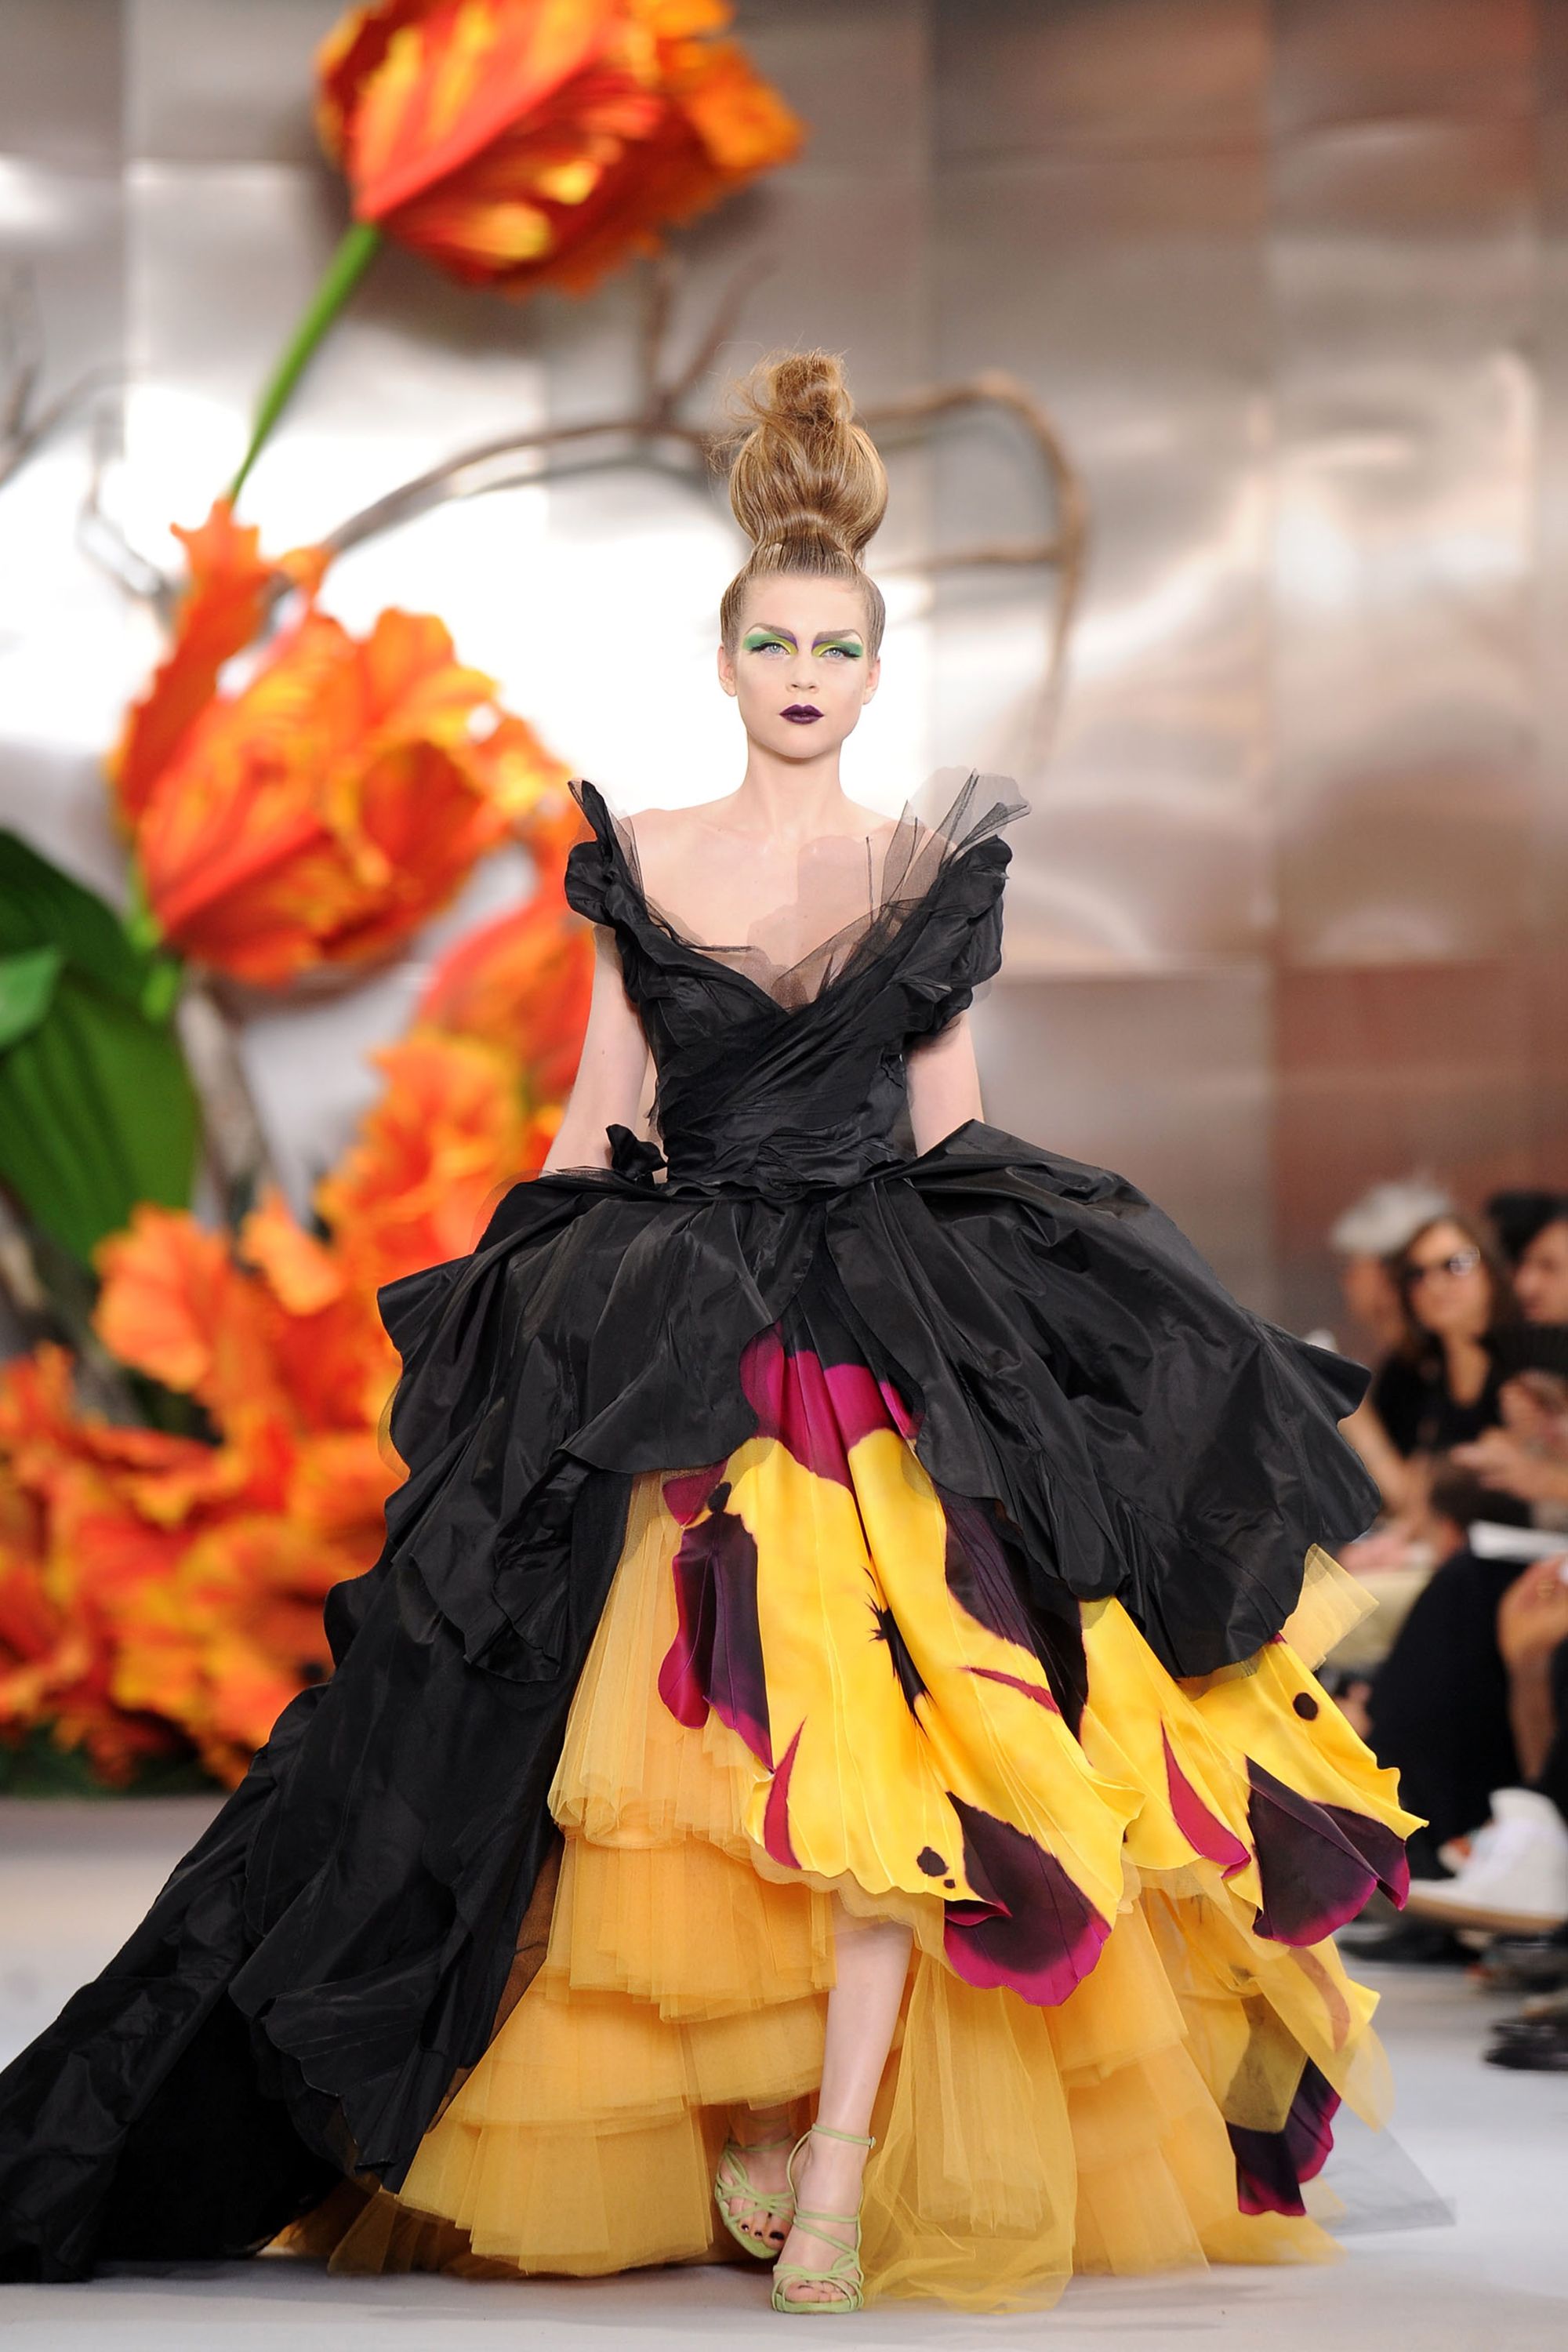 Most spectacular dresses from couture